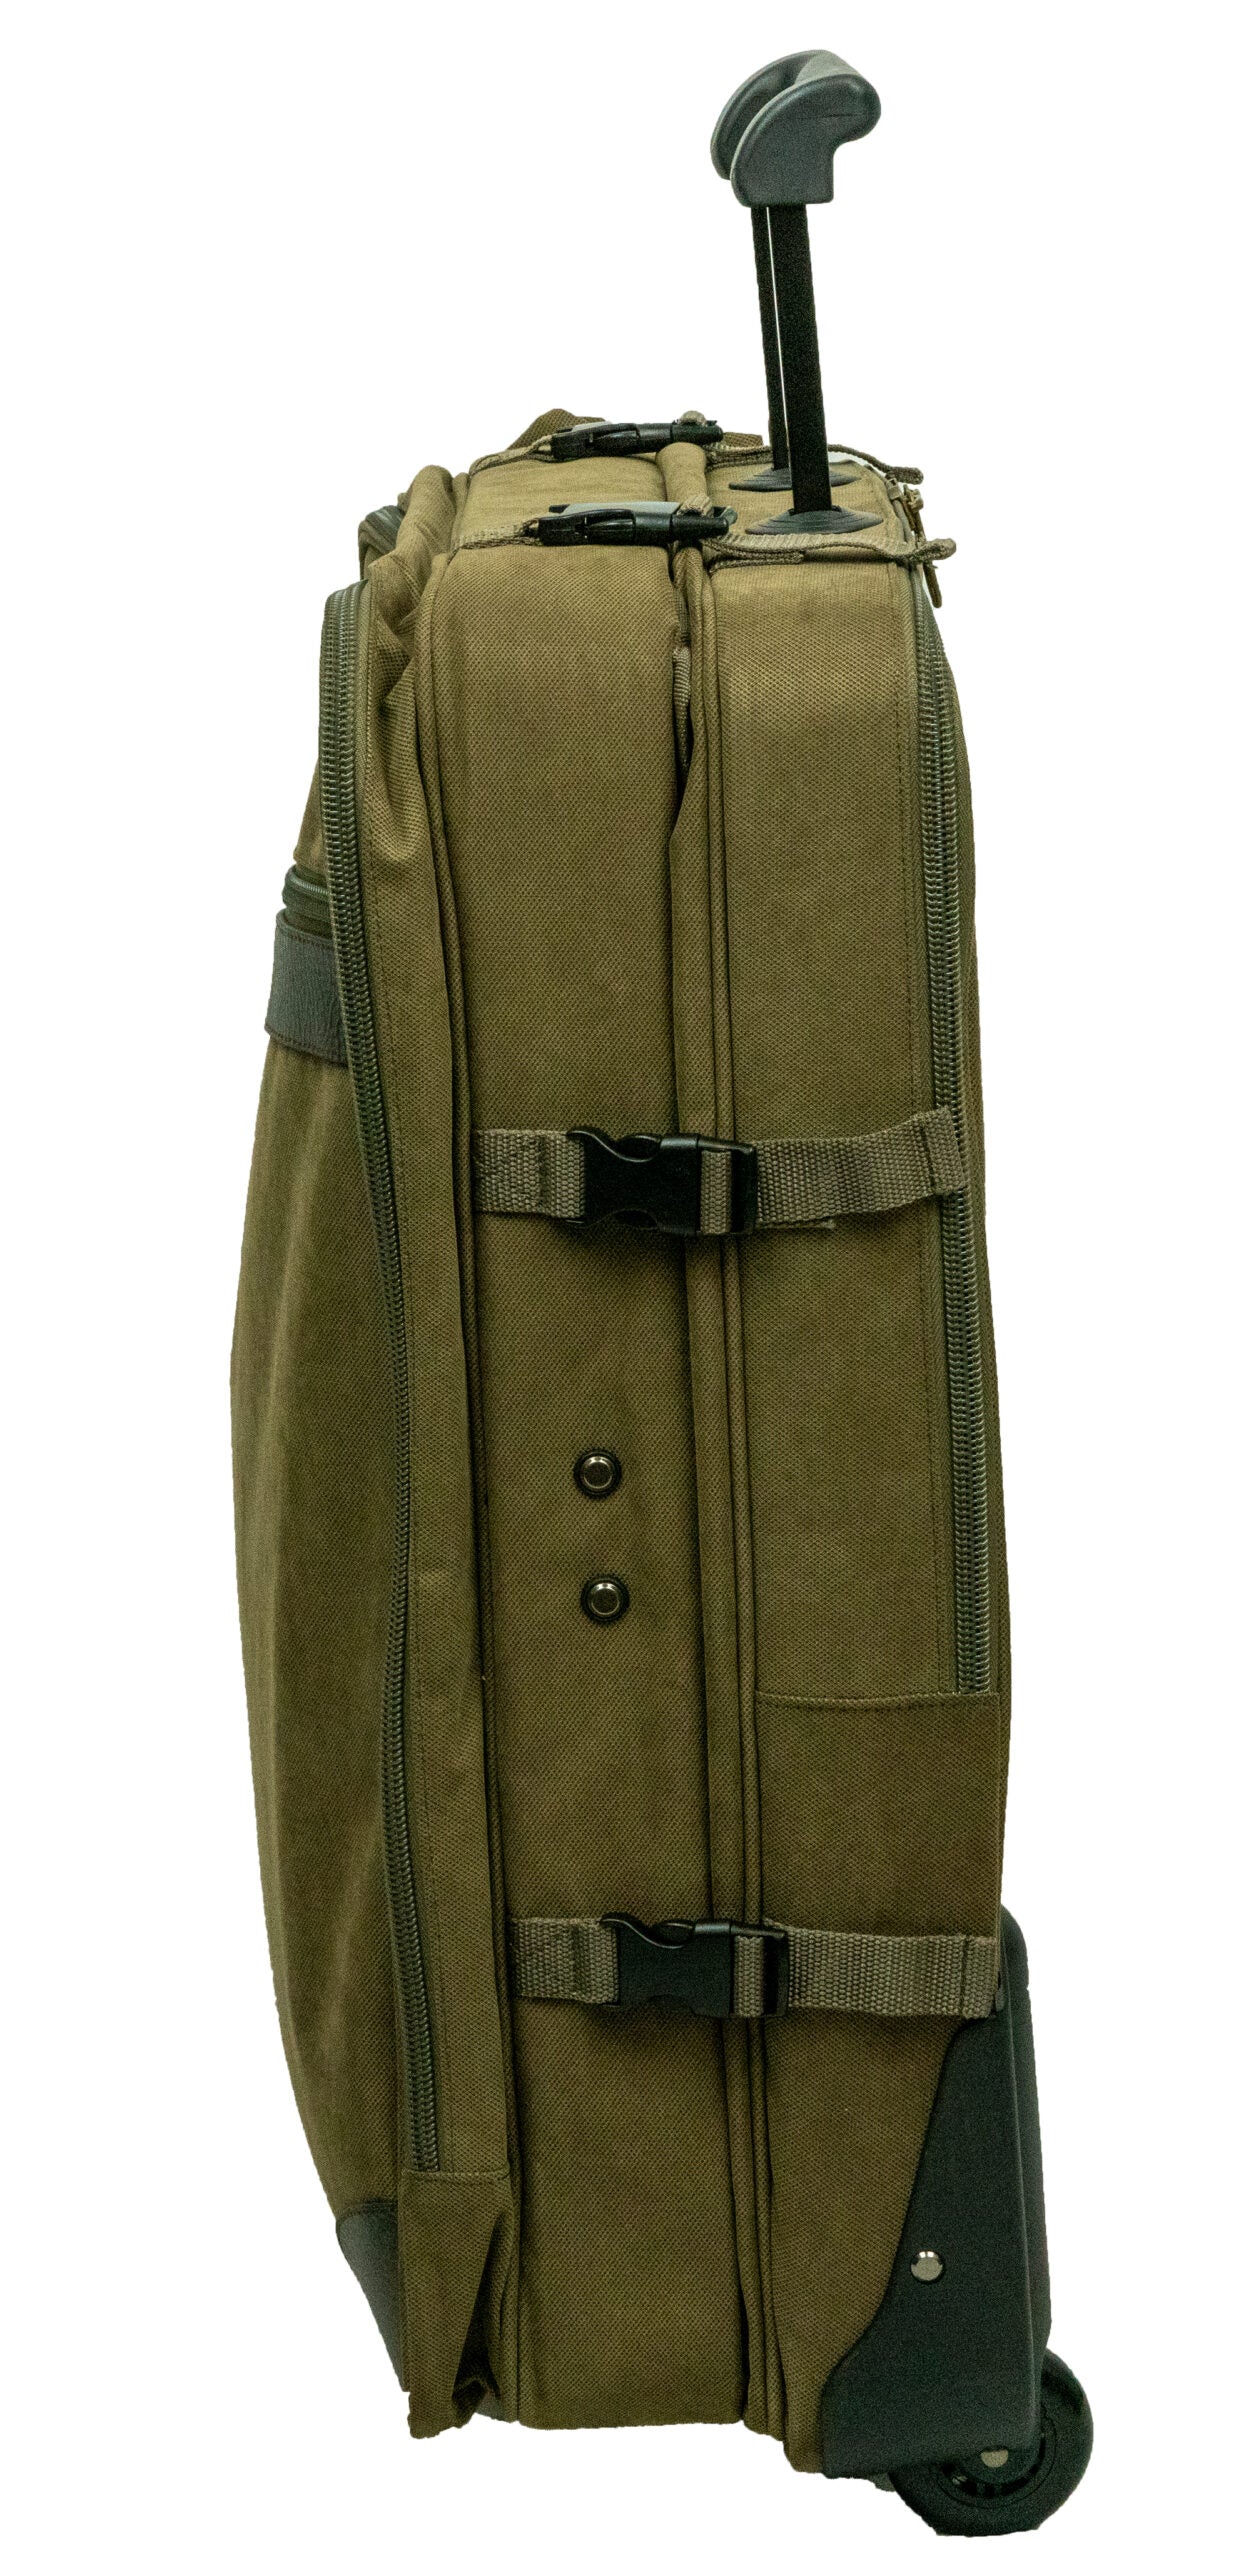 Luxury Garment Bag - Clothing Storage - For Suits and Overcoats |  KirbyAllison.com